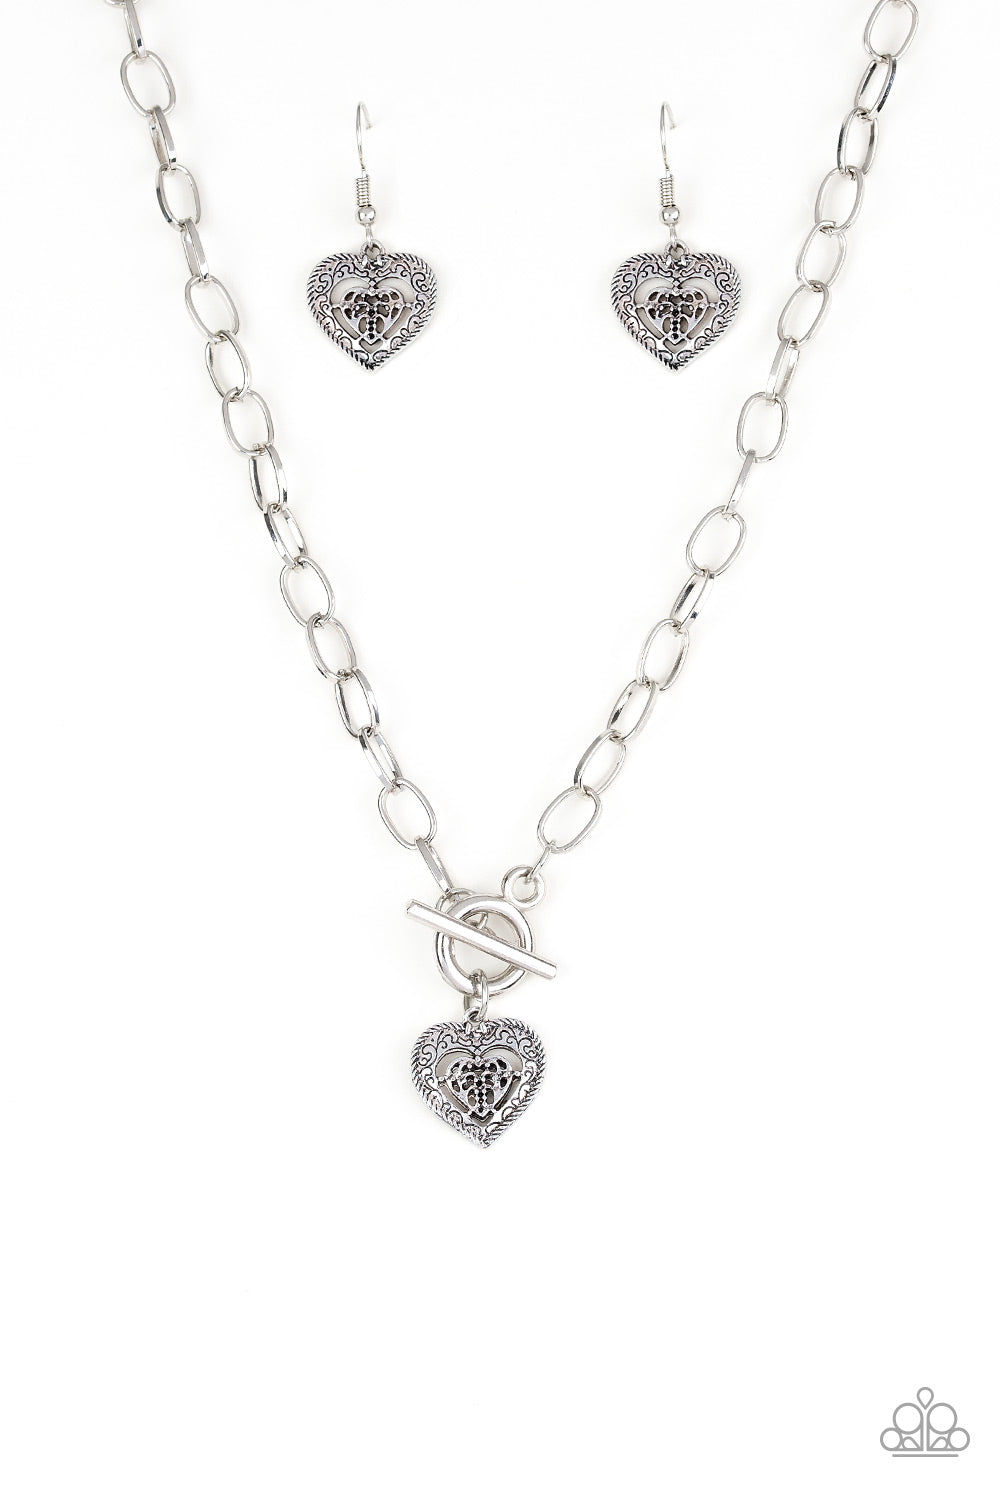 Paparazzi ♥ Say No AMOUR - Silver ♥ Necklace – LisaAbercrombie